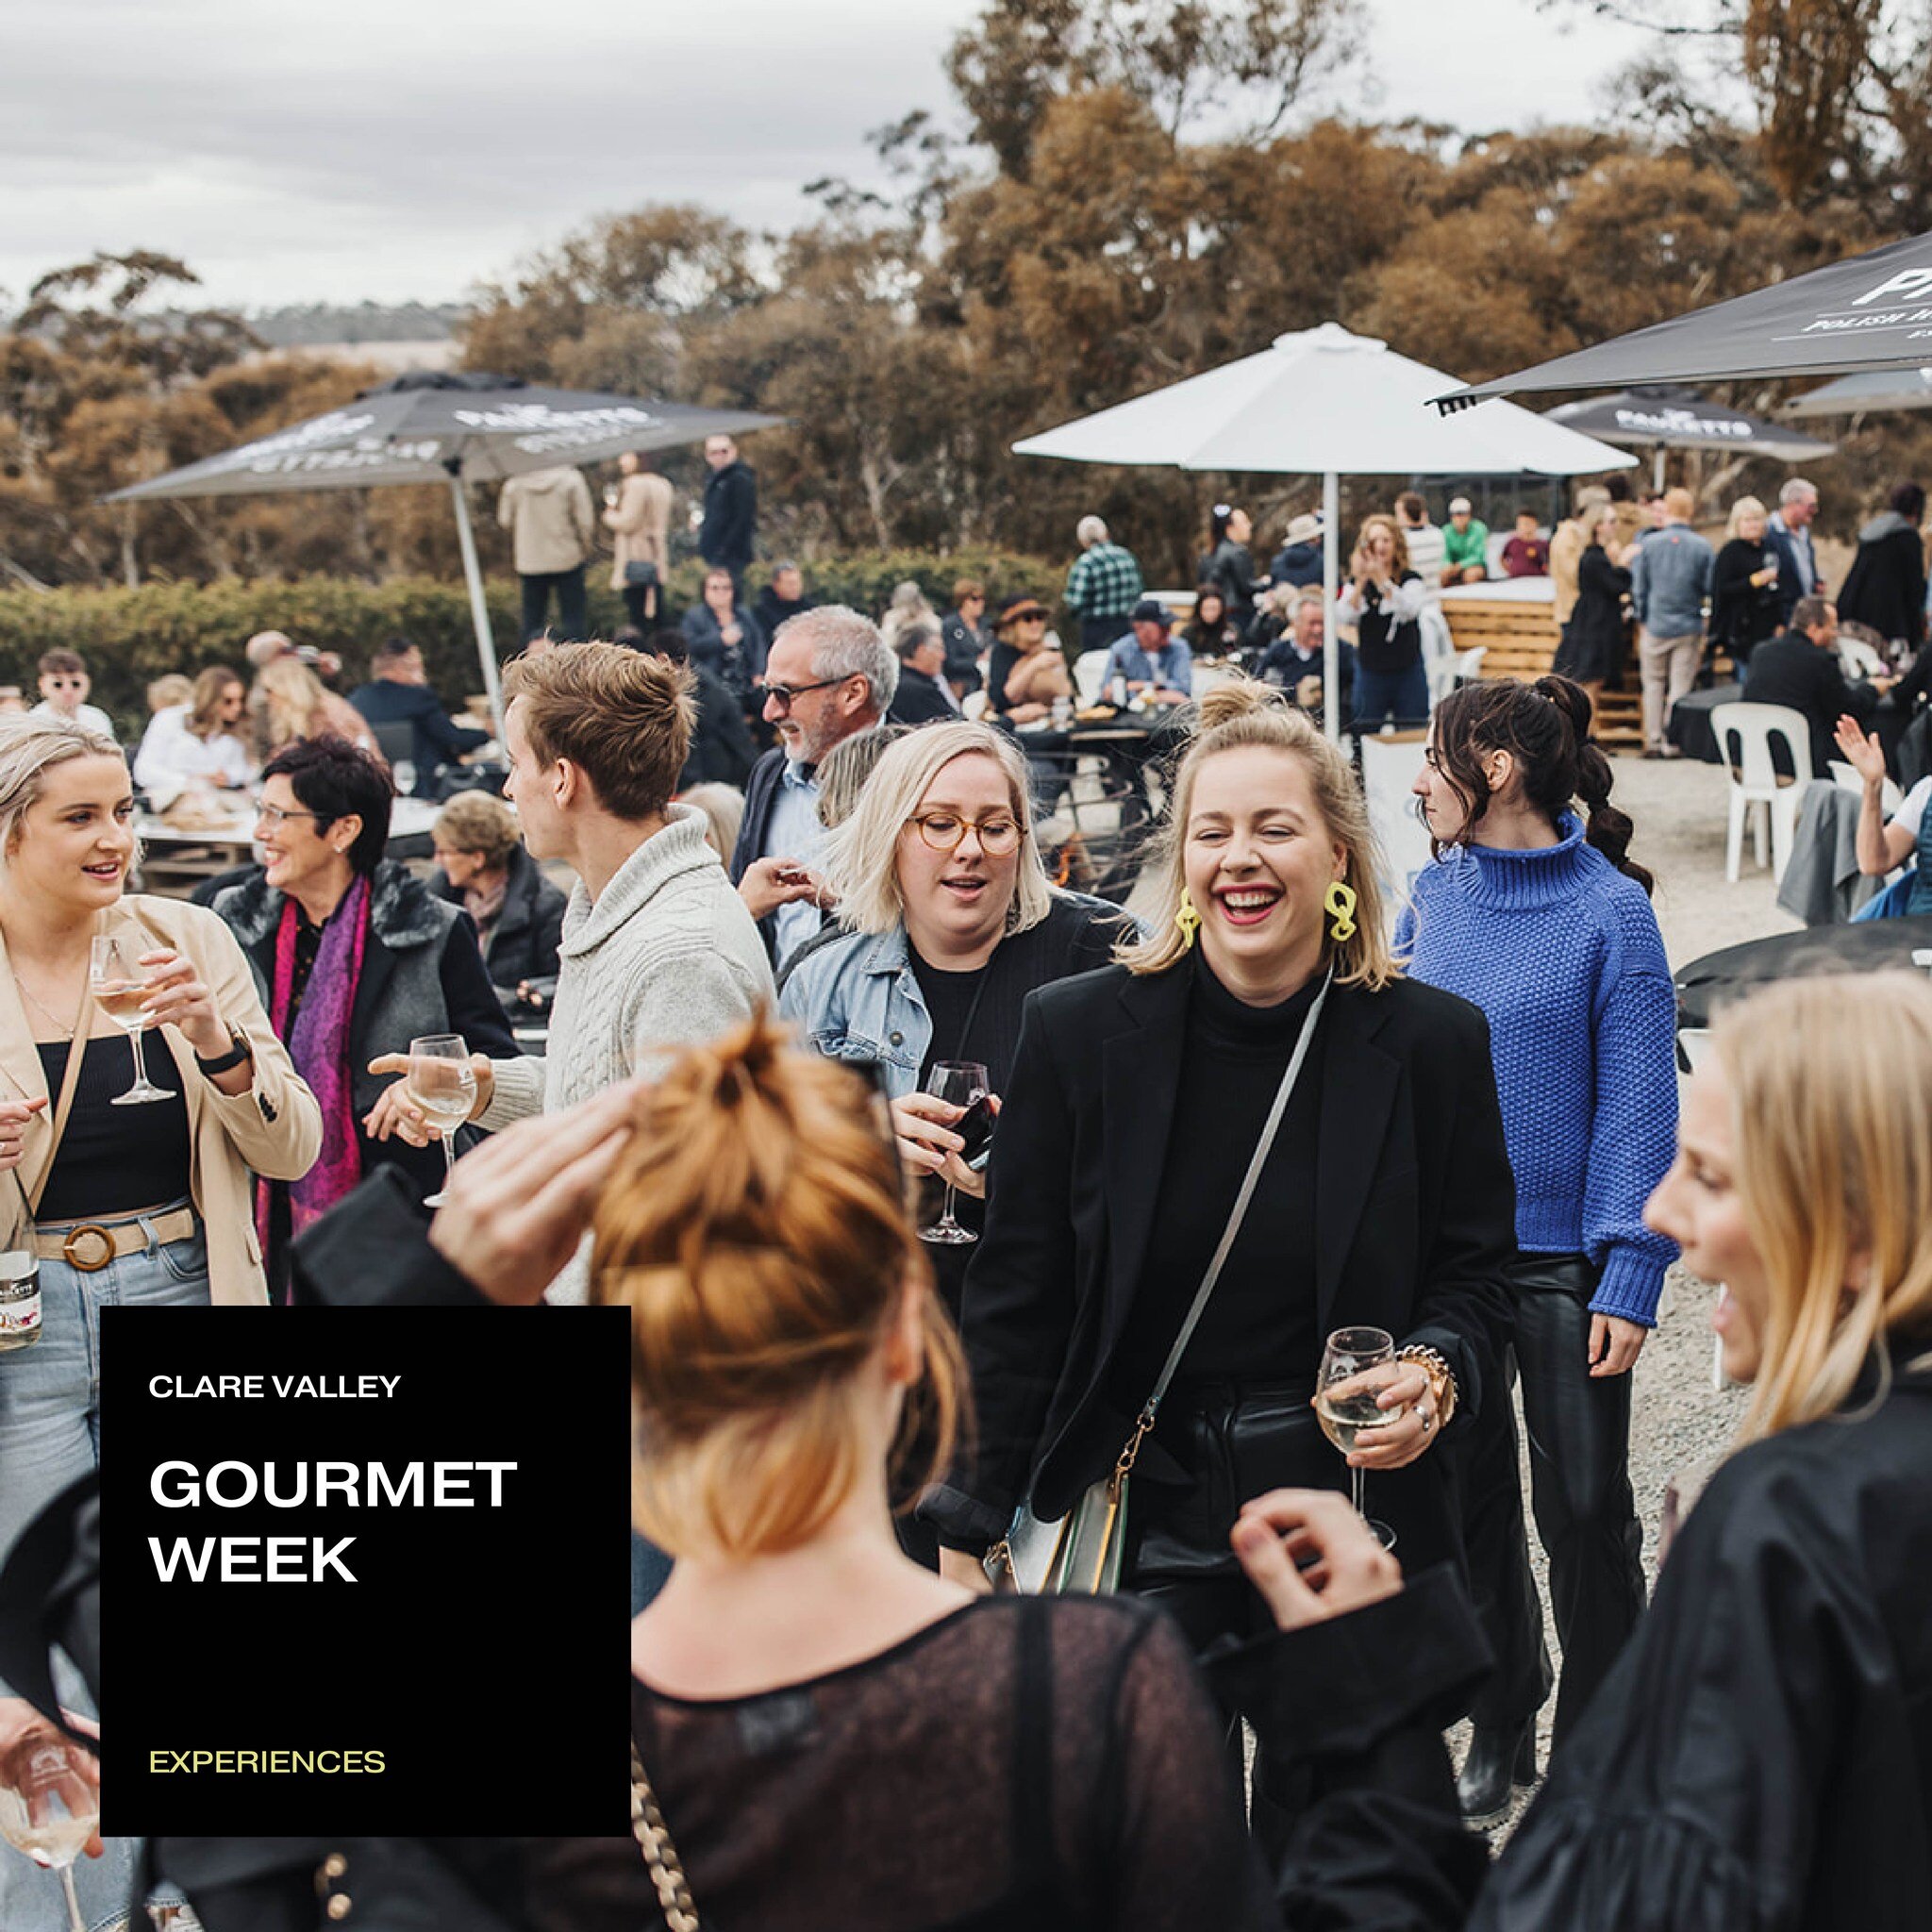 The state&rsquo;s gastronomical delights are continuing this weekend with @clarevalleygourmet kicking off! 

And of course we can&rsquo;t wait for ten whole days of food, wine, fun and festivities! From gourmet degustations featuring local produce, r